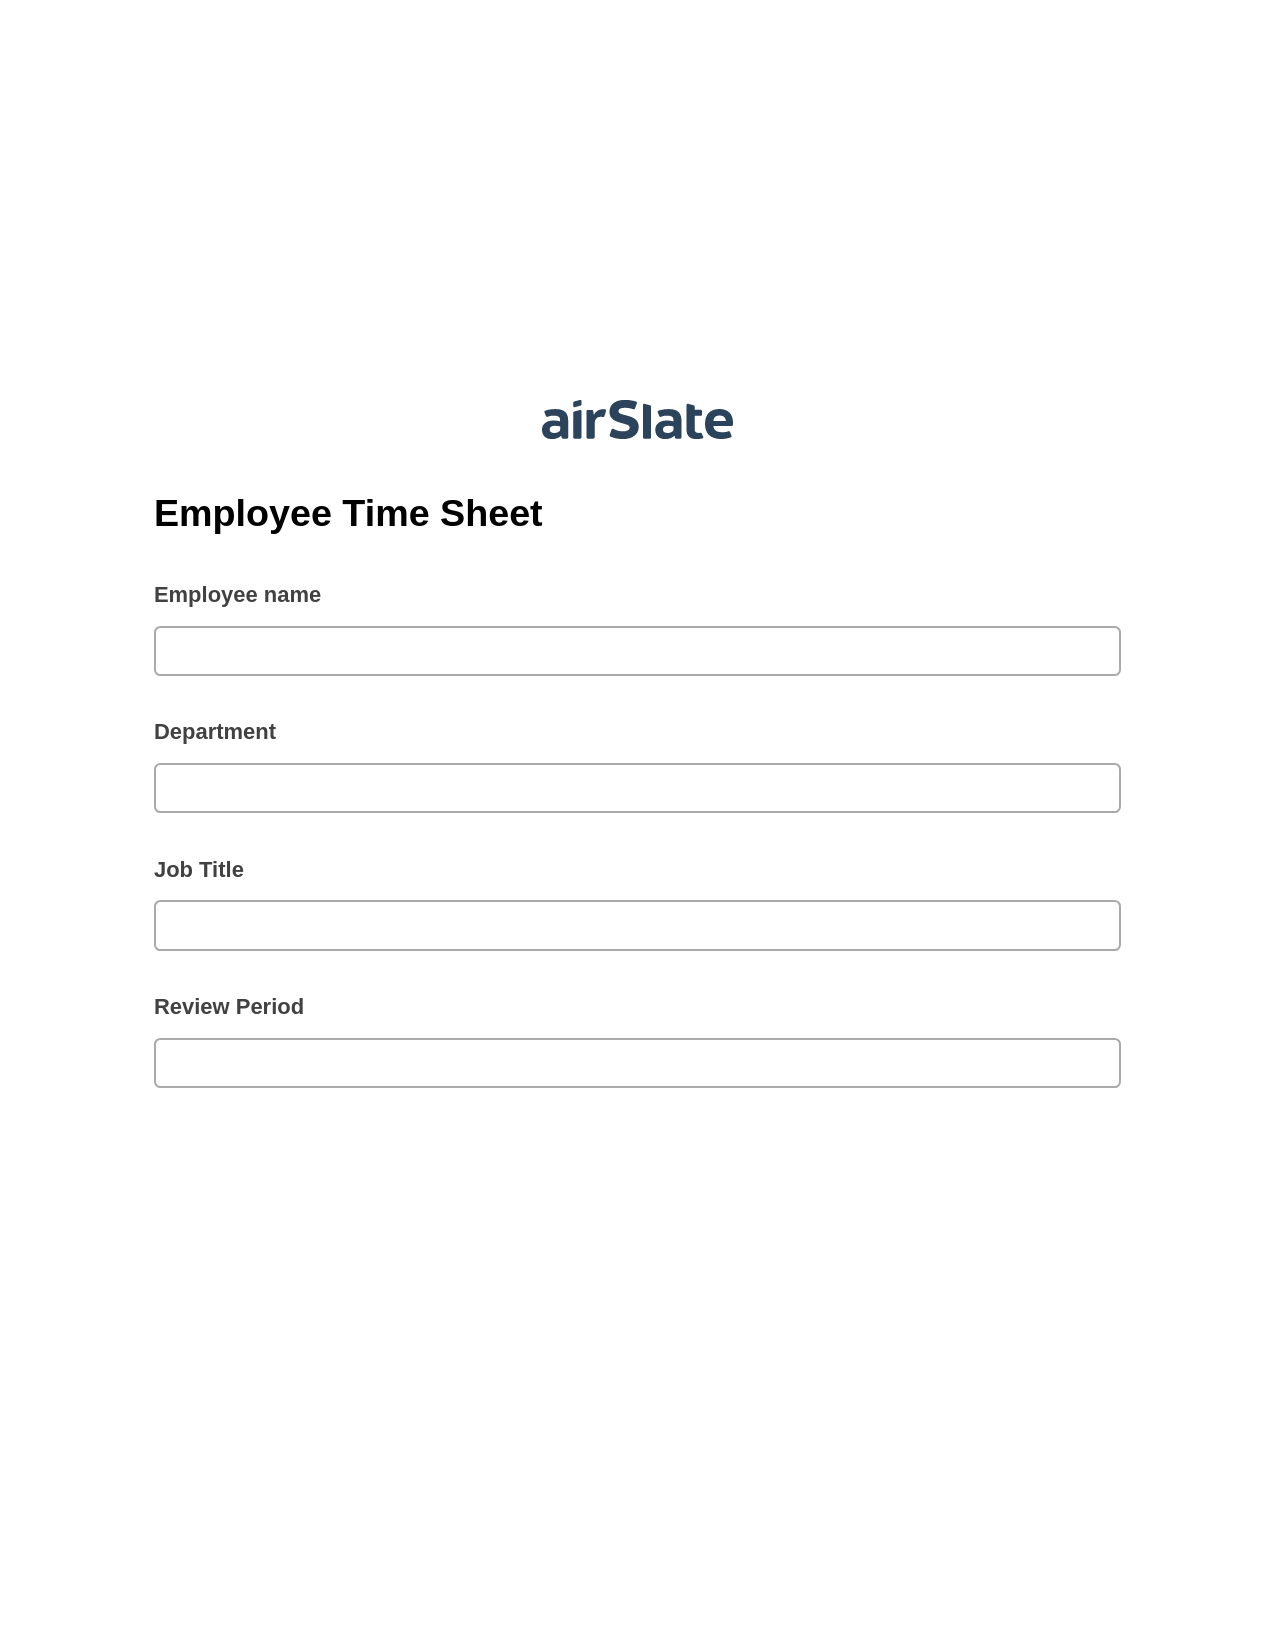 Employee Time Sheet Pre-fill from Salesforce Records Bot, Create Salesforce Records Bot, Export to Excel 365 Bot